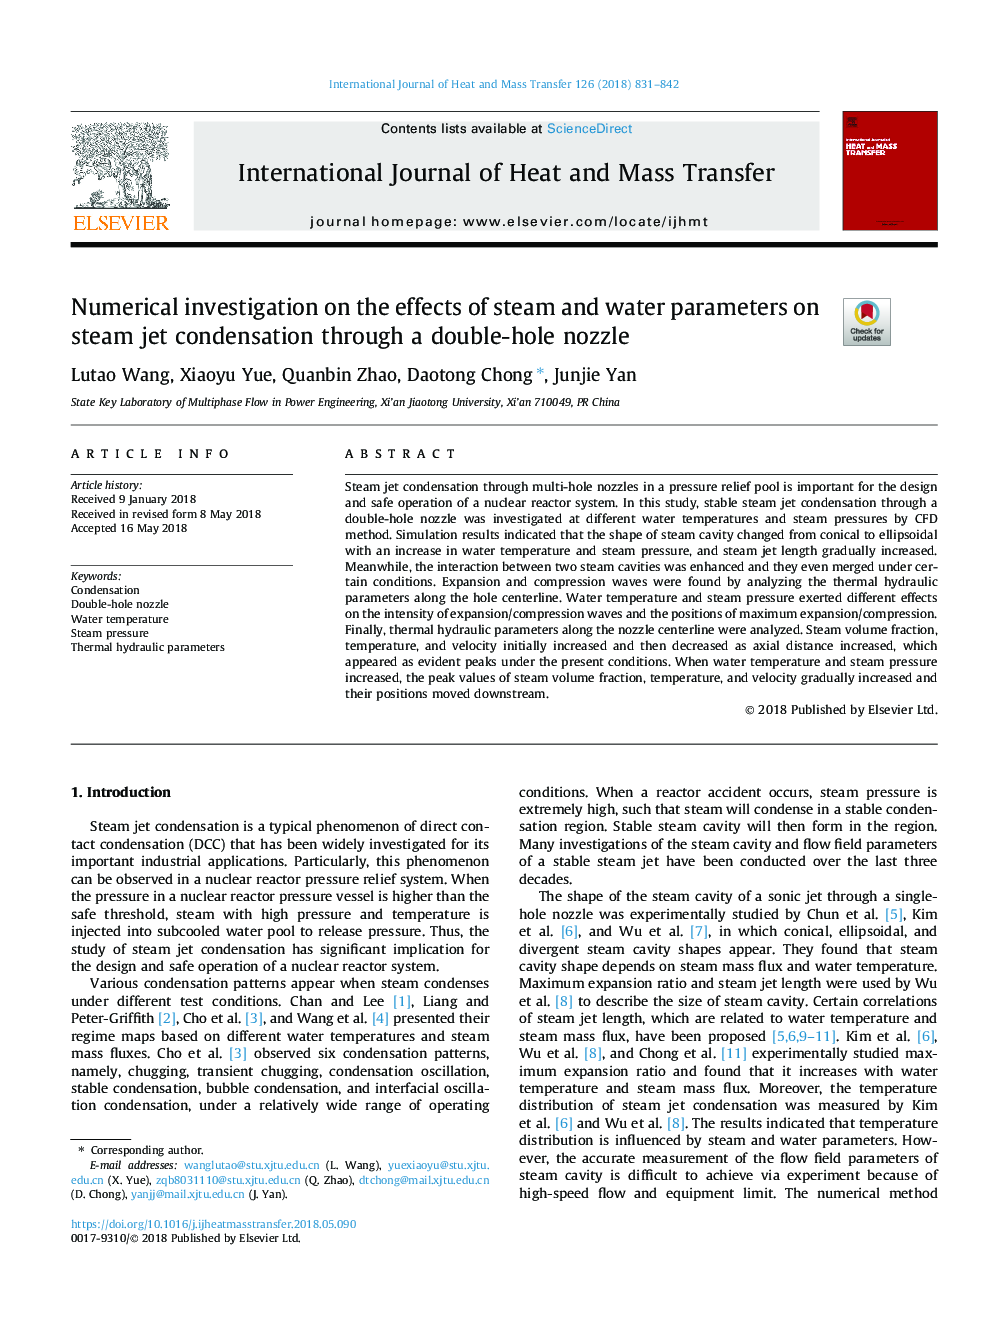 Numerical investigation on the effects of steam and water parameters on steam jet condensation through a double-hole nozzle